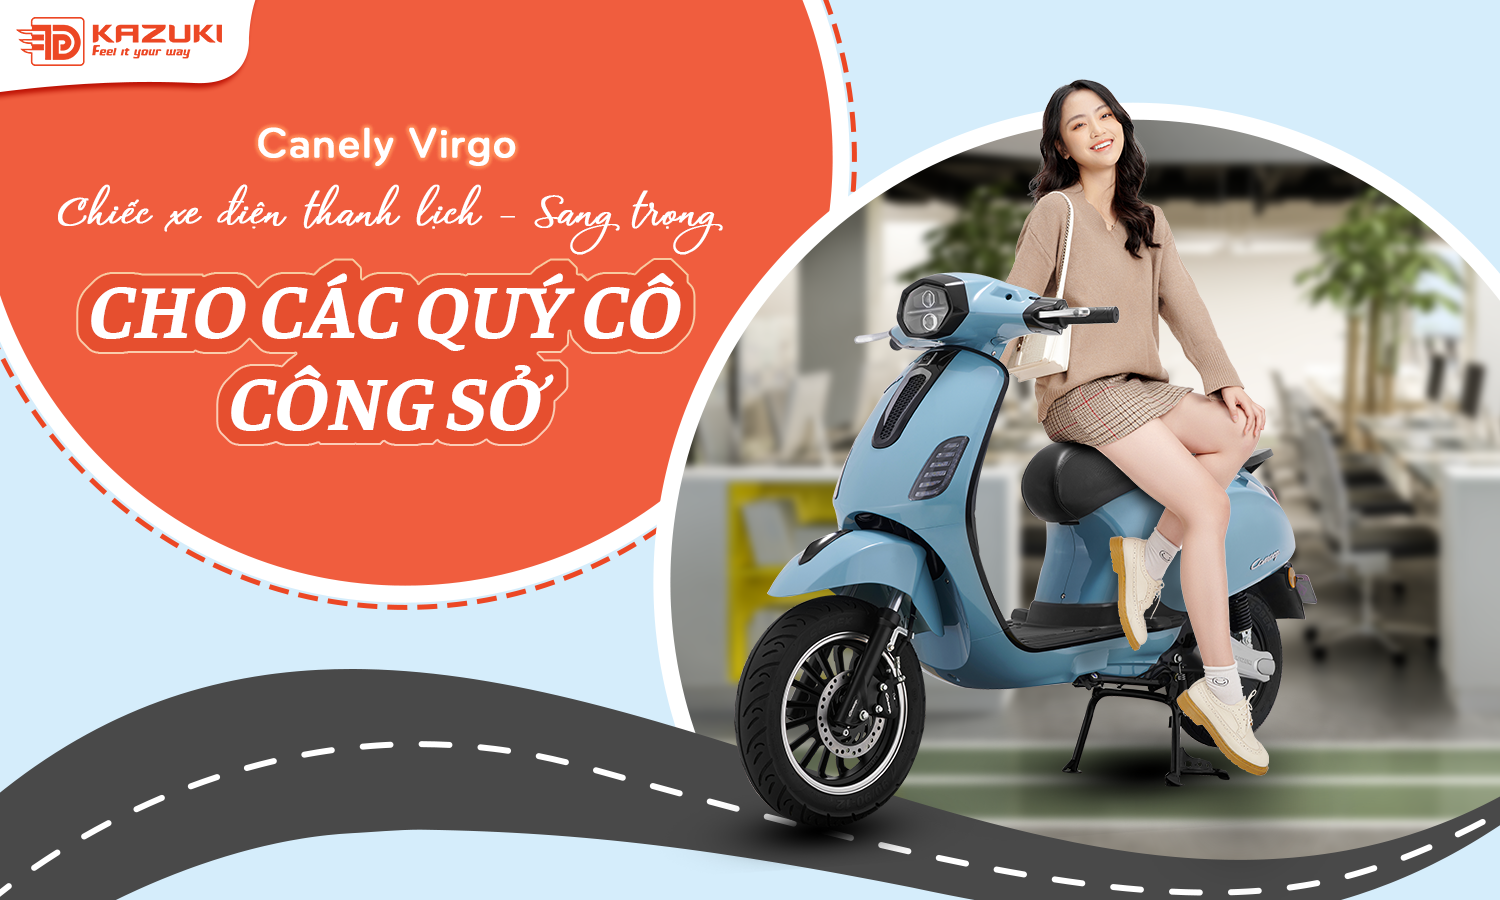 Web Canely Virgo Chiếc Xe điện Thanh Lịch1